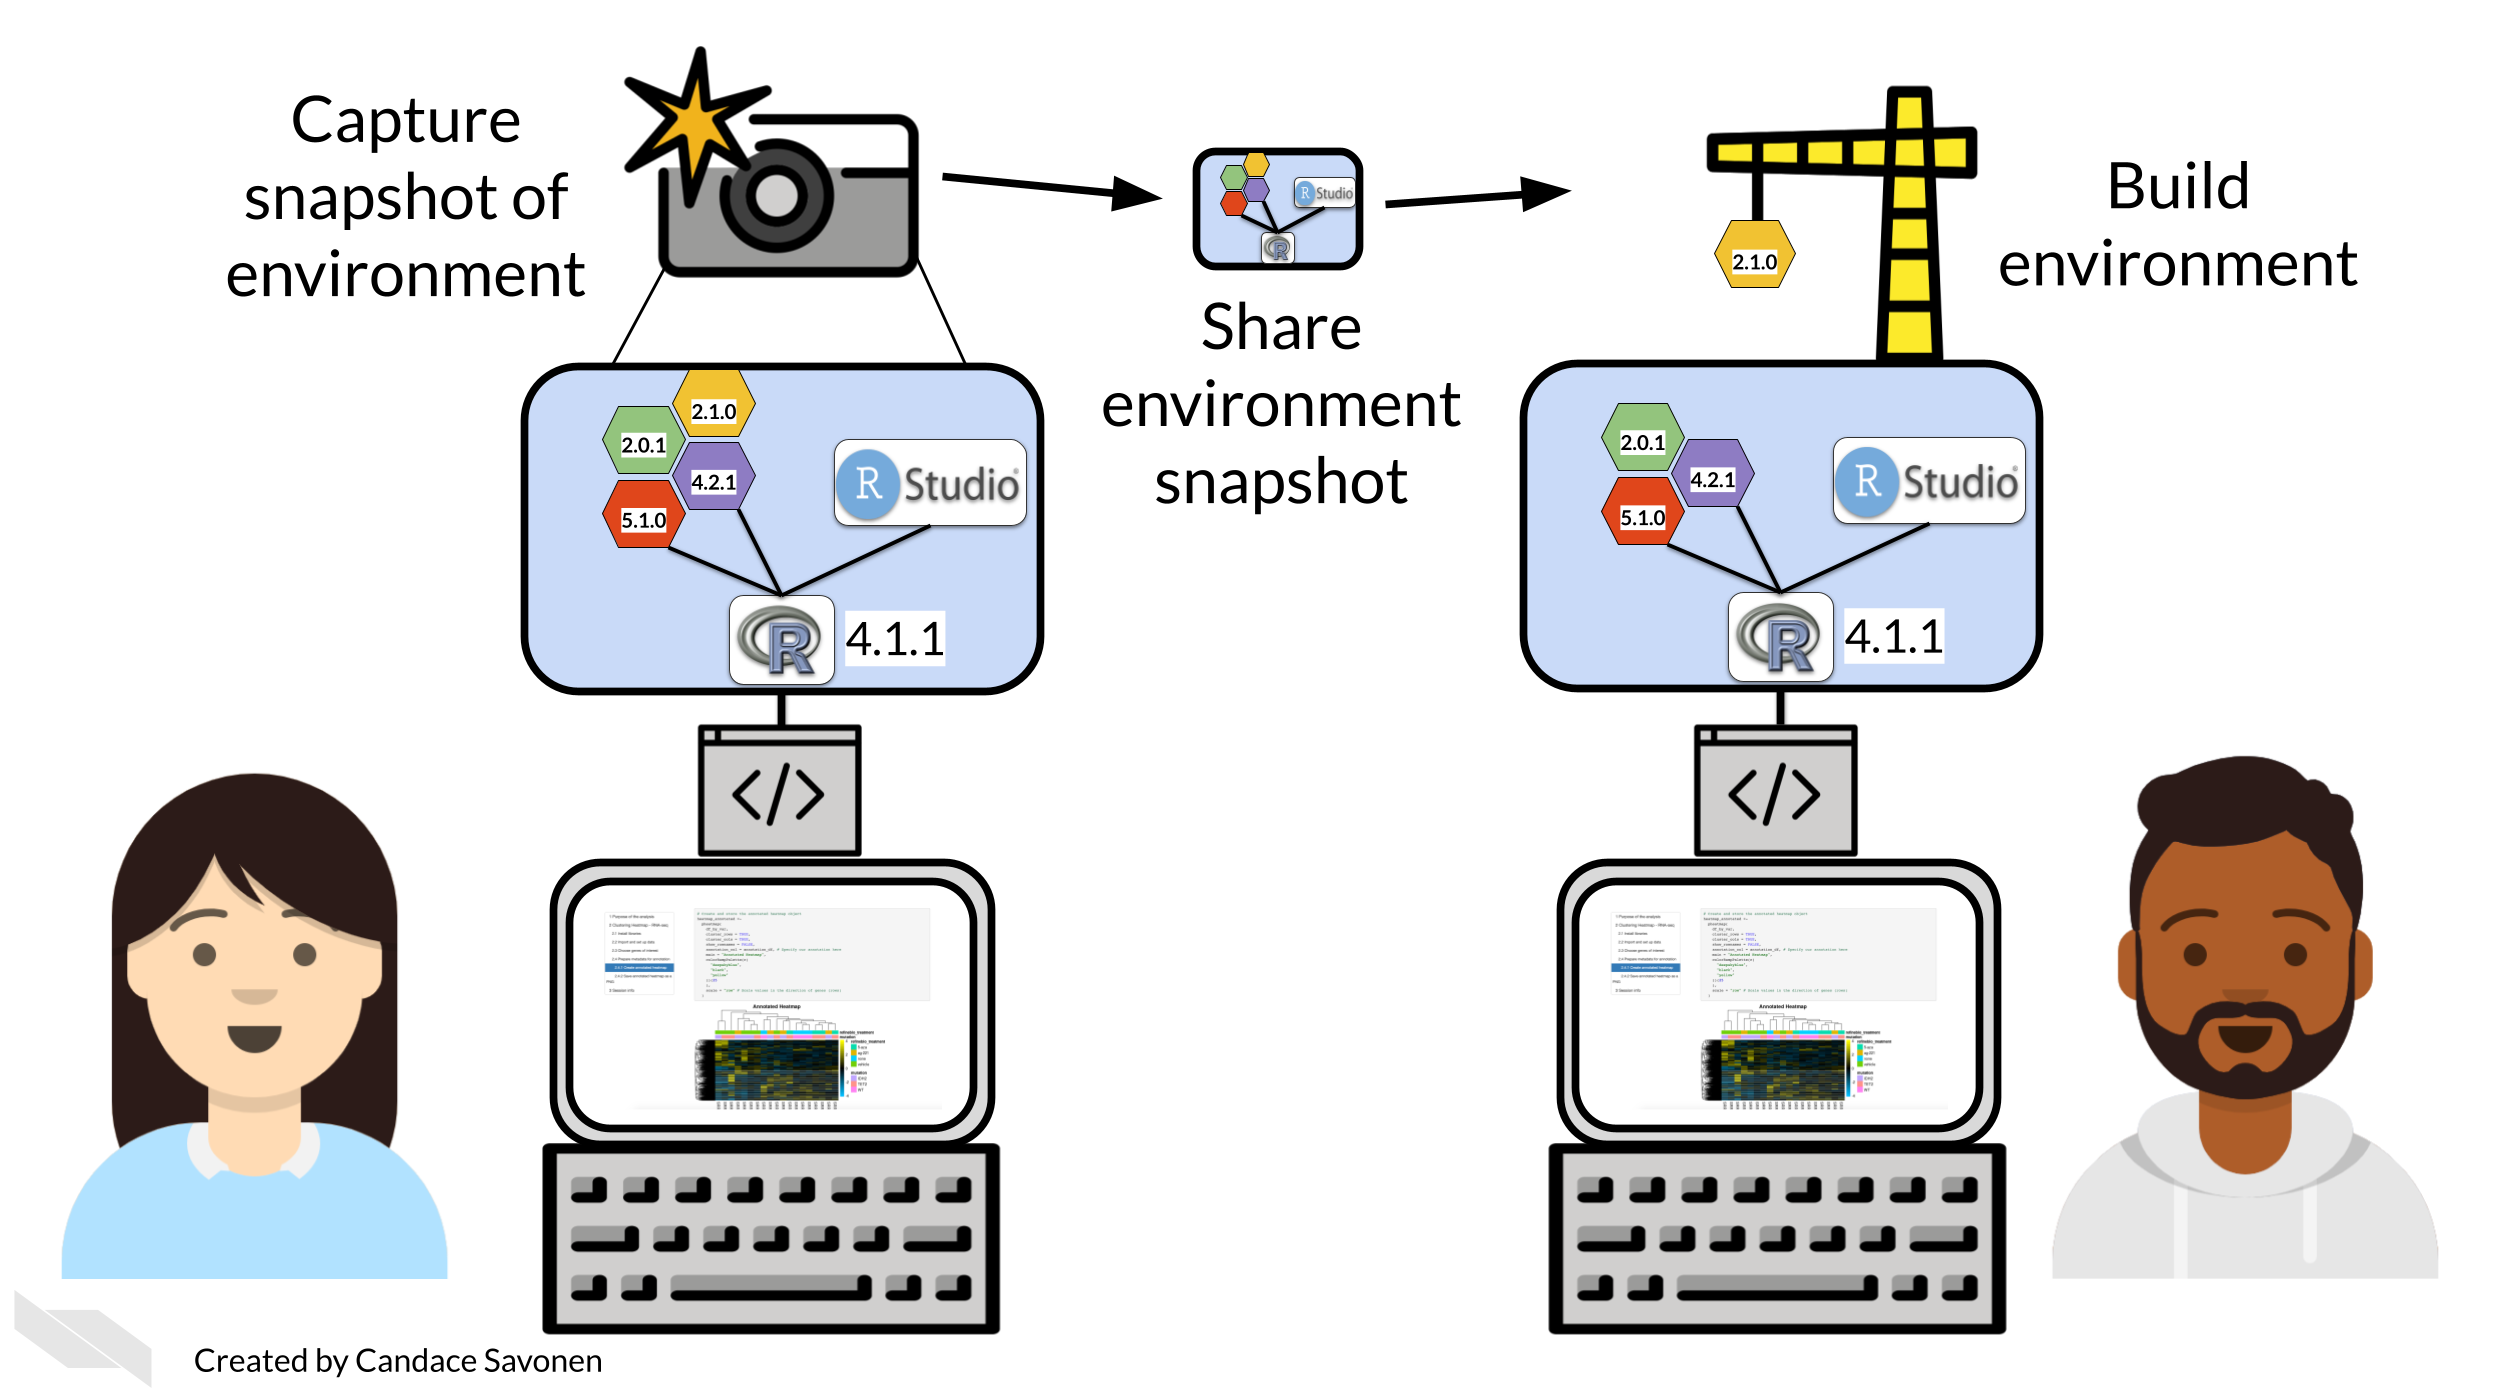 In general, package managers work by capturing a snapshot of the environment and when that environment snapshot is shared, it attempt to rebuild it. In this example we show that Ruby has an environment, and using a package manager, has taken a snapshot of her computing environment. That snapshot is shared with Avi, who can use the package manager to attempt to build it on his own computer. This will help address some differences in package versions between two individual’s computers.